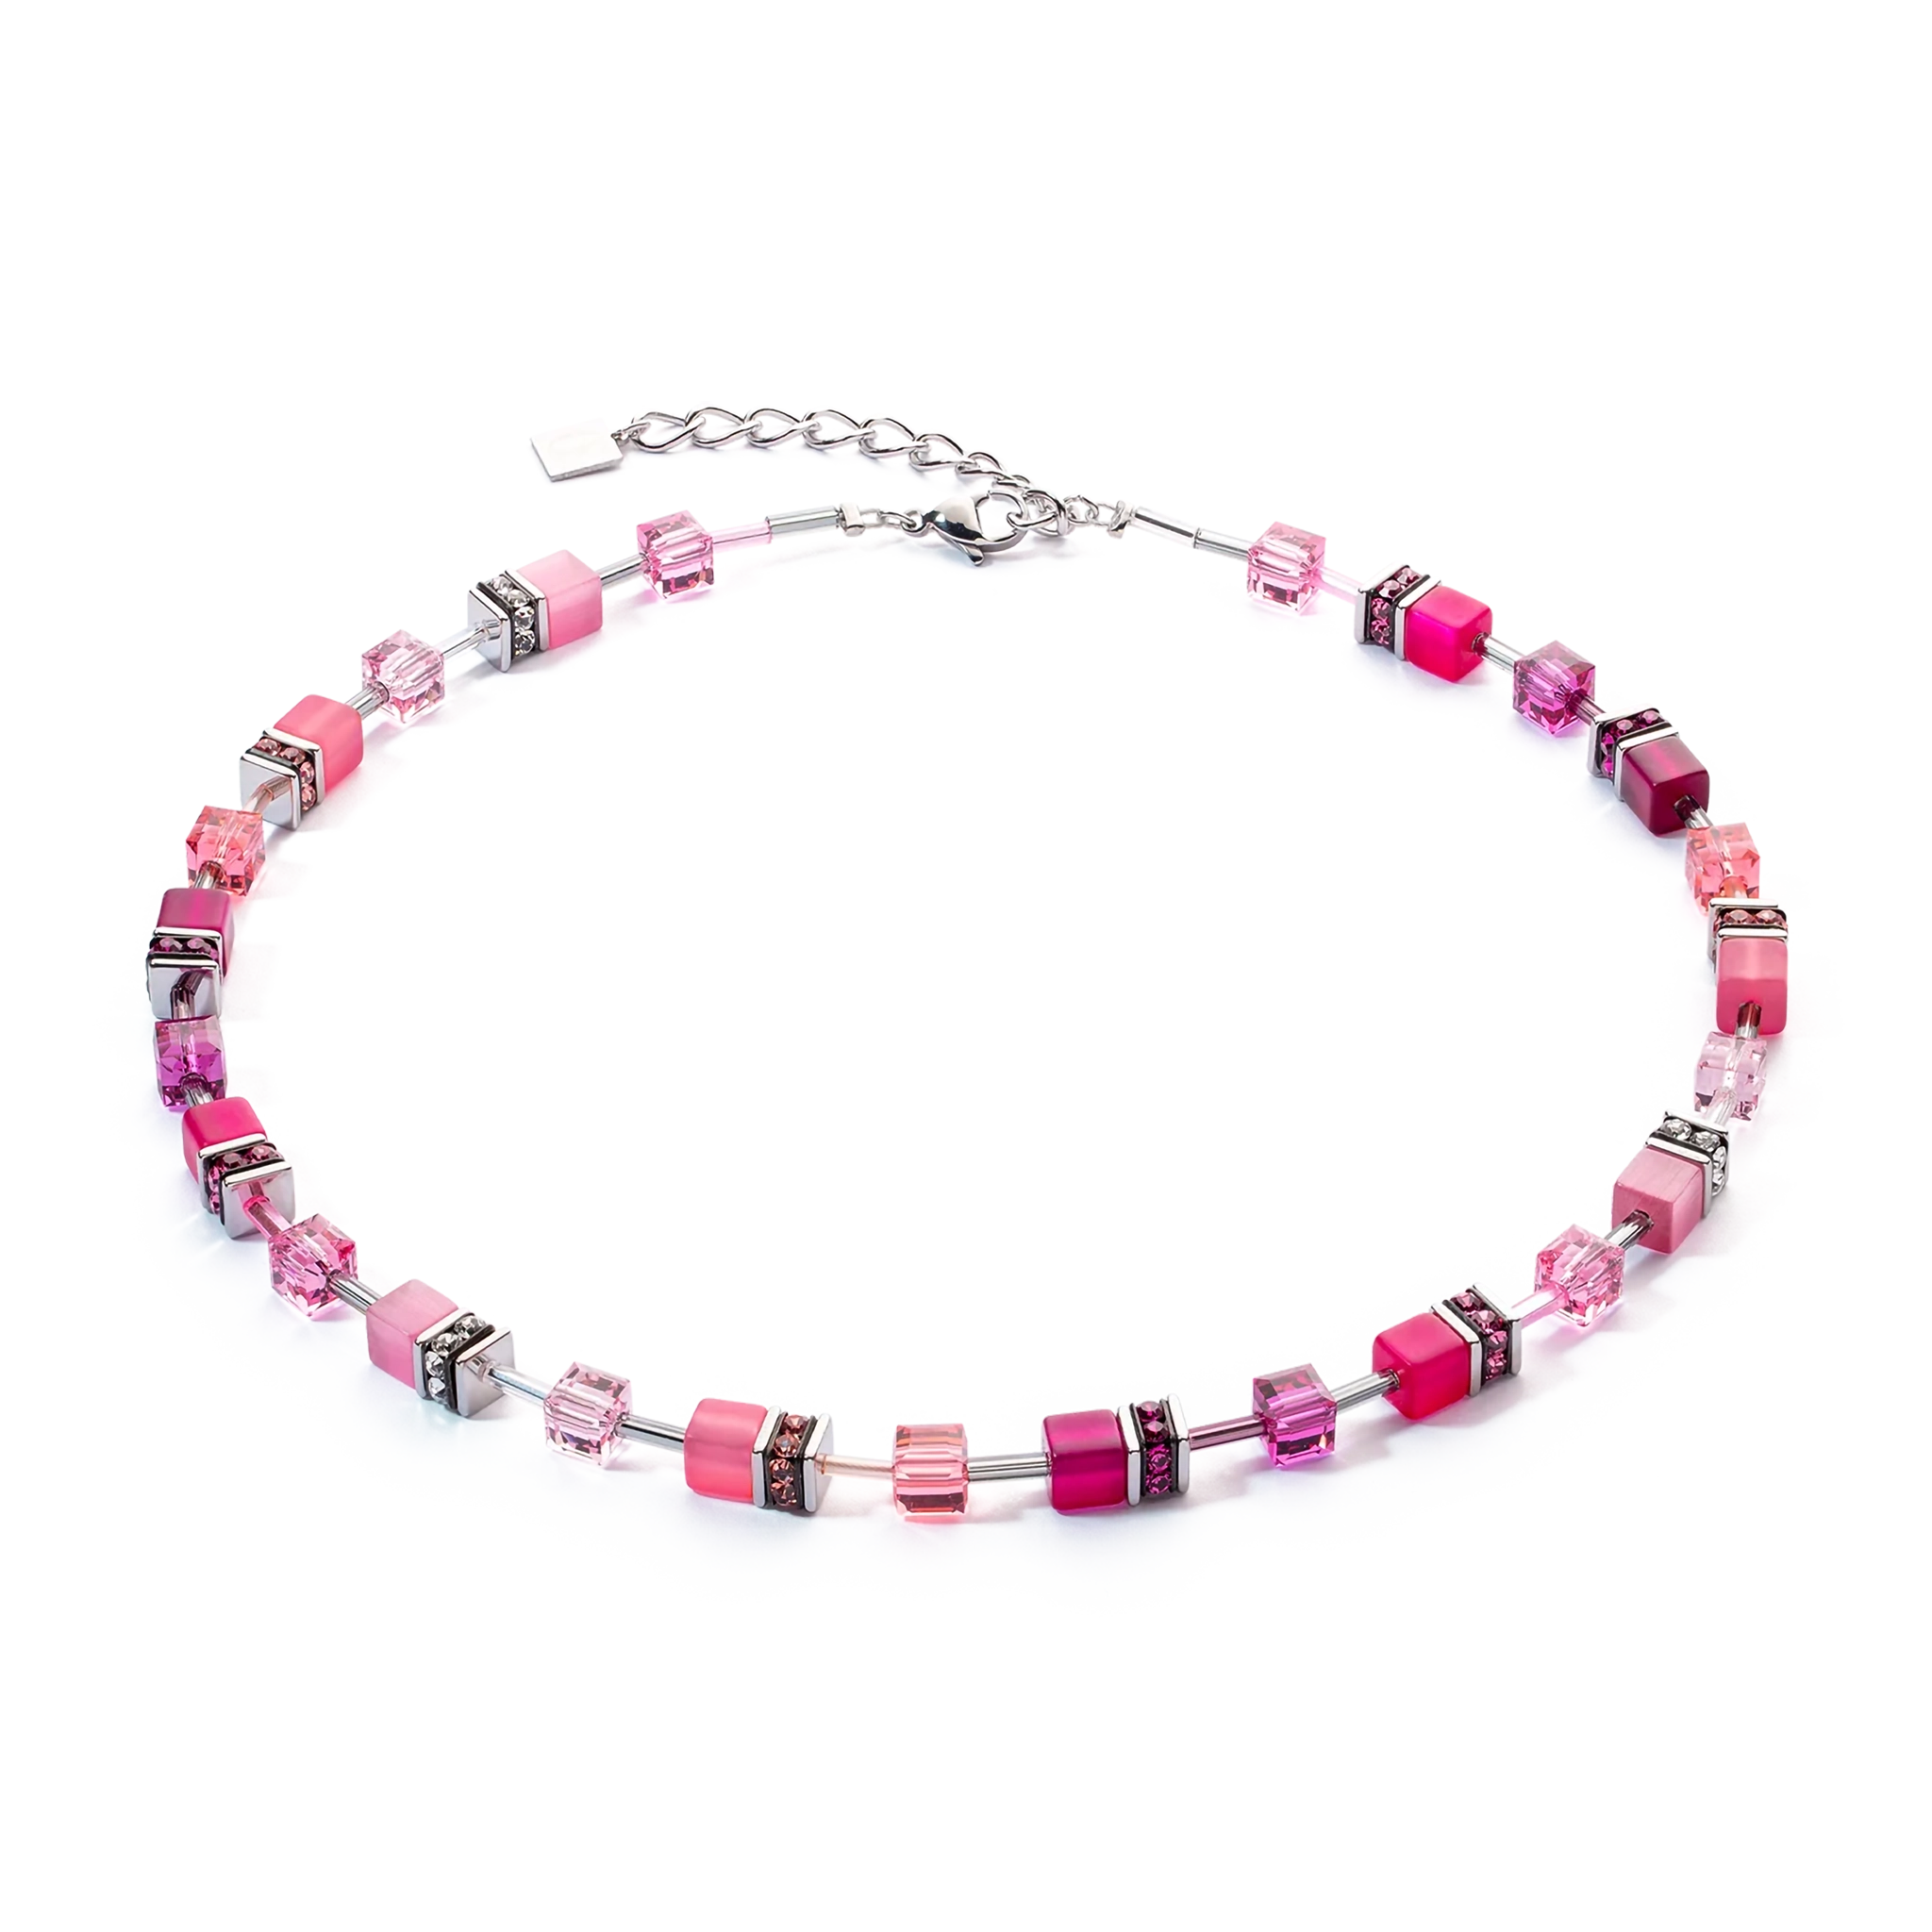 A steel necklace featuring a variety of bright pink cube shaped stones and glass beads